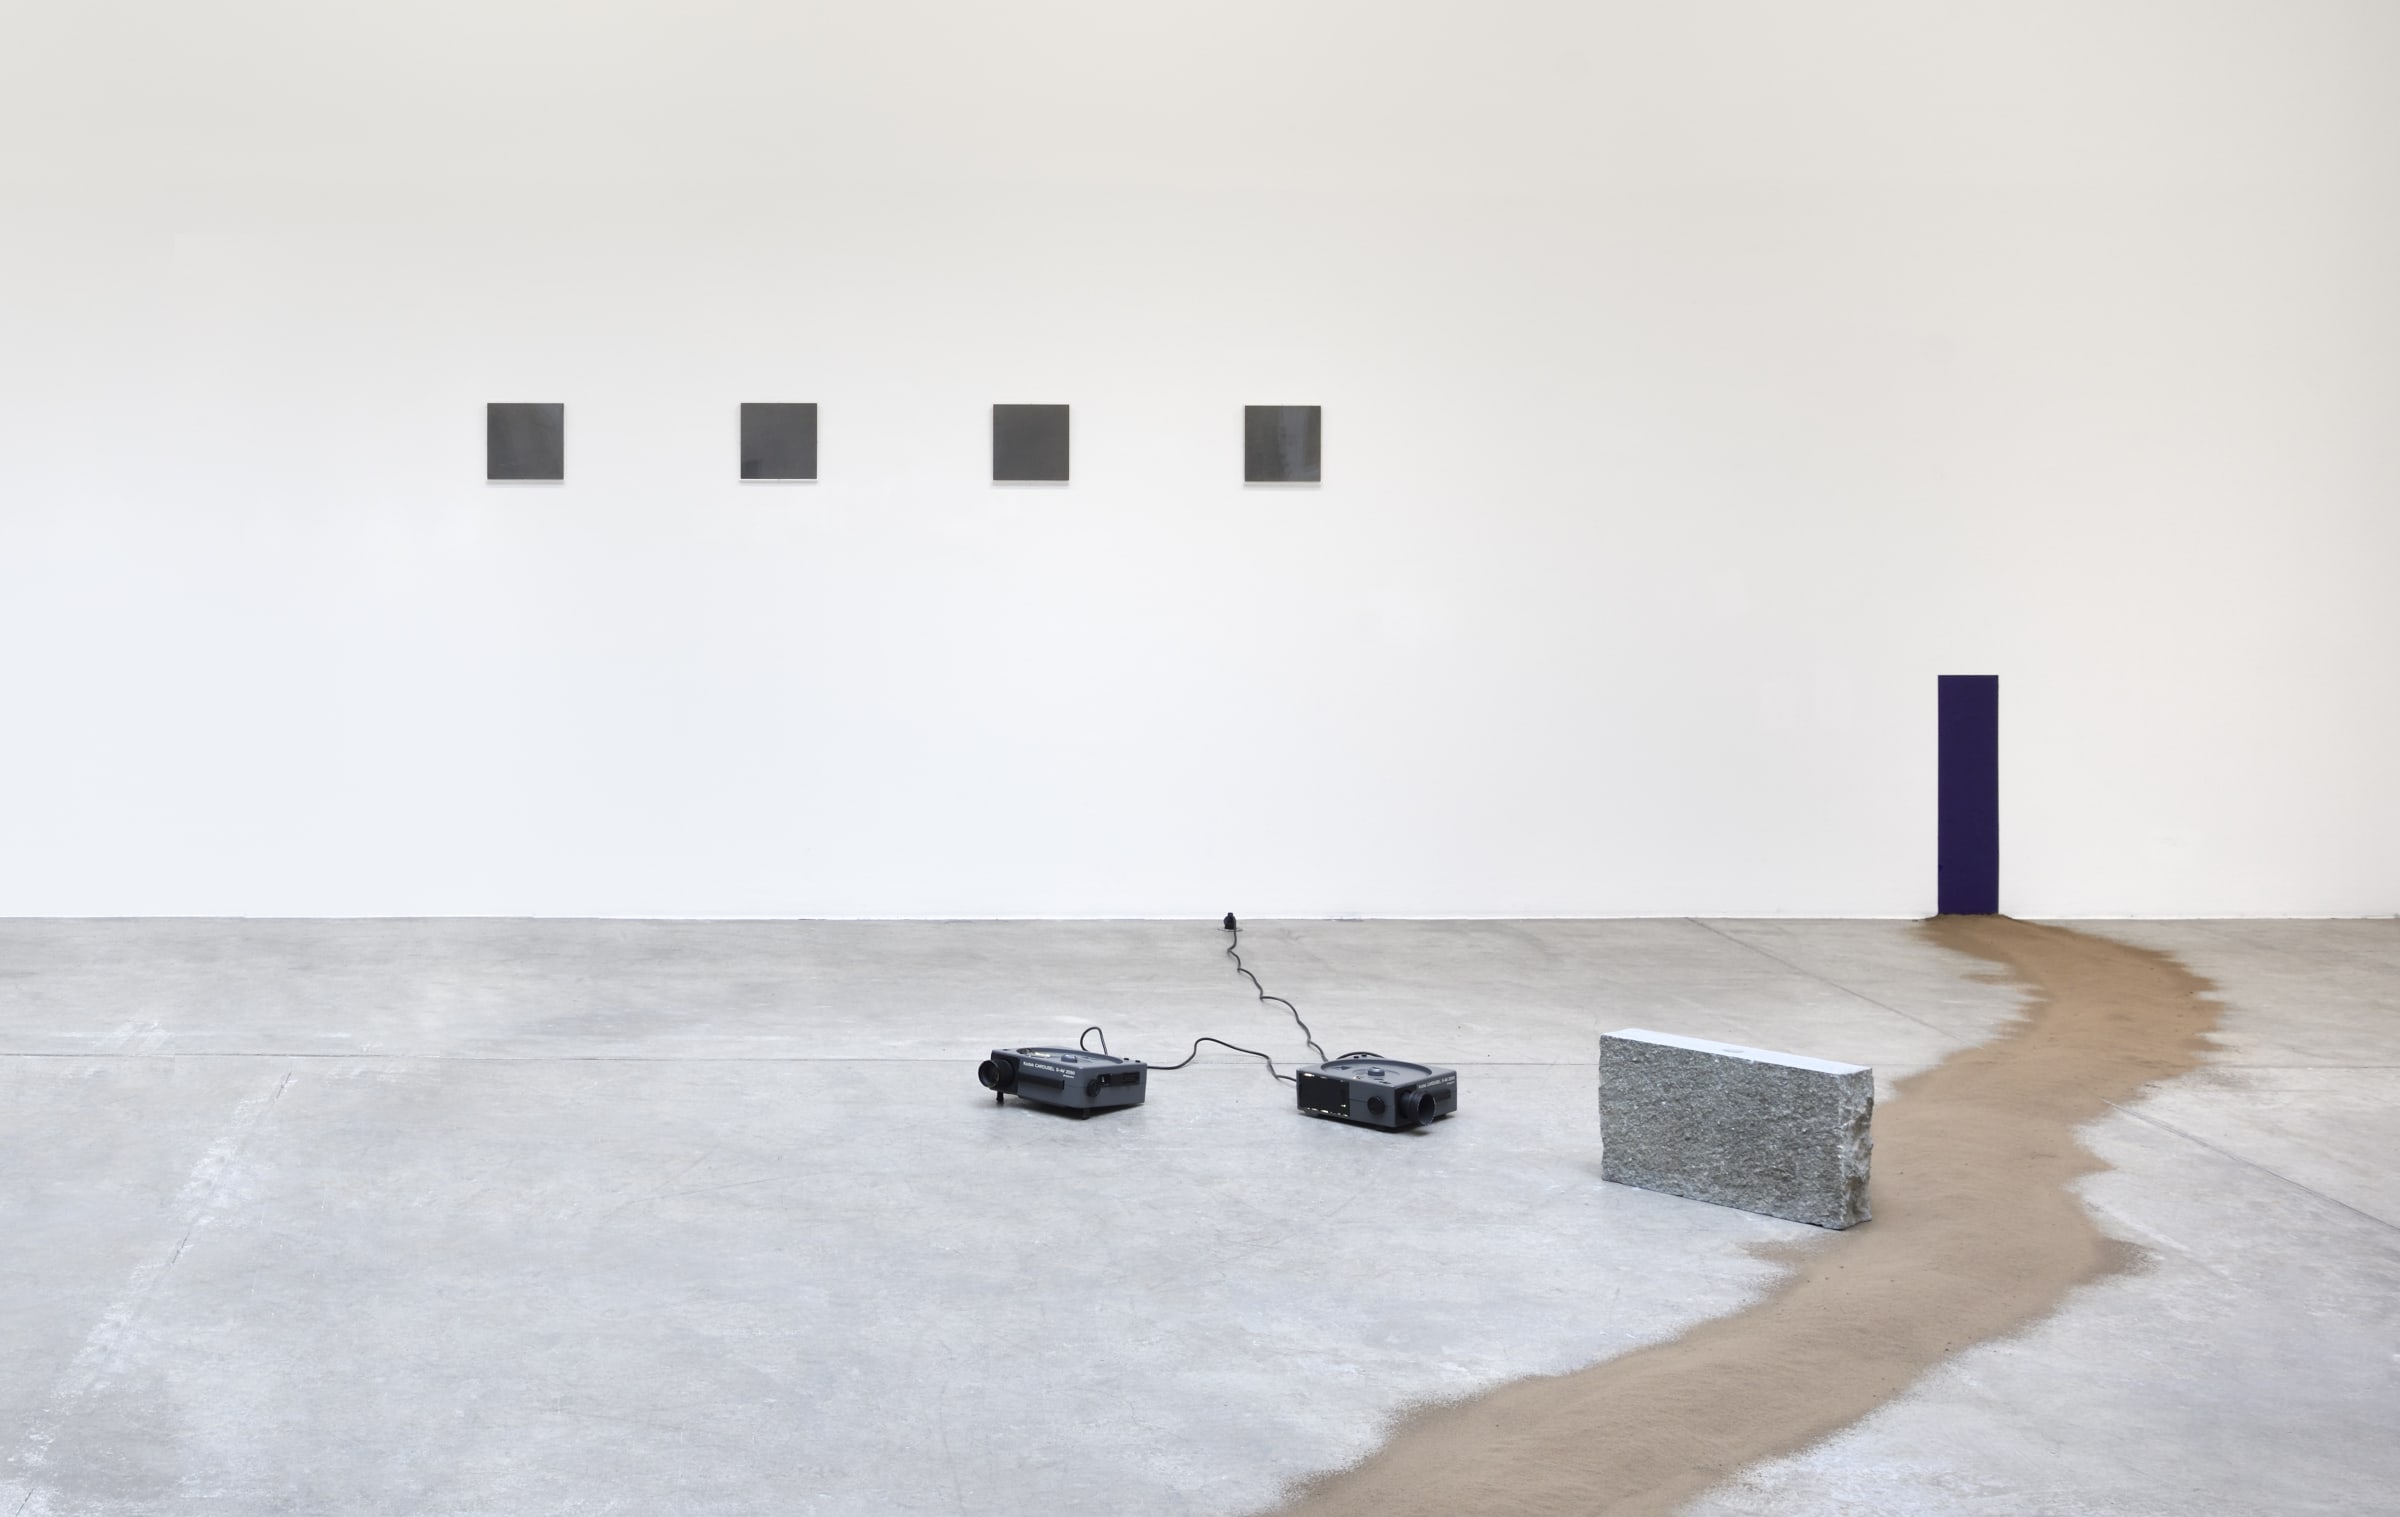 Exhibition views of works at Galerie Marian Goodman